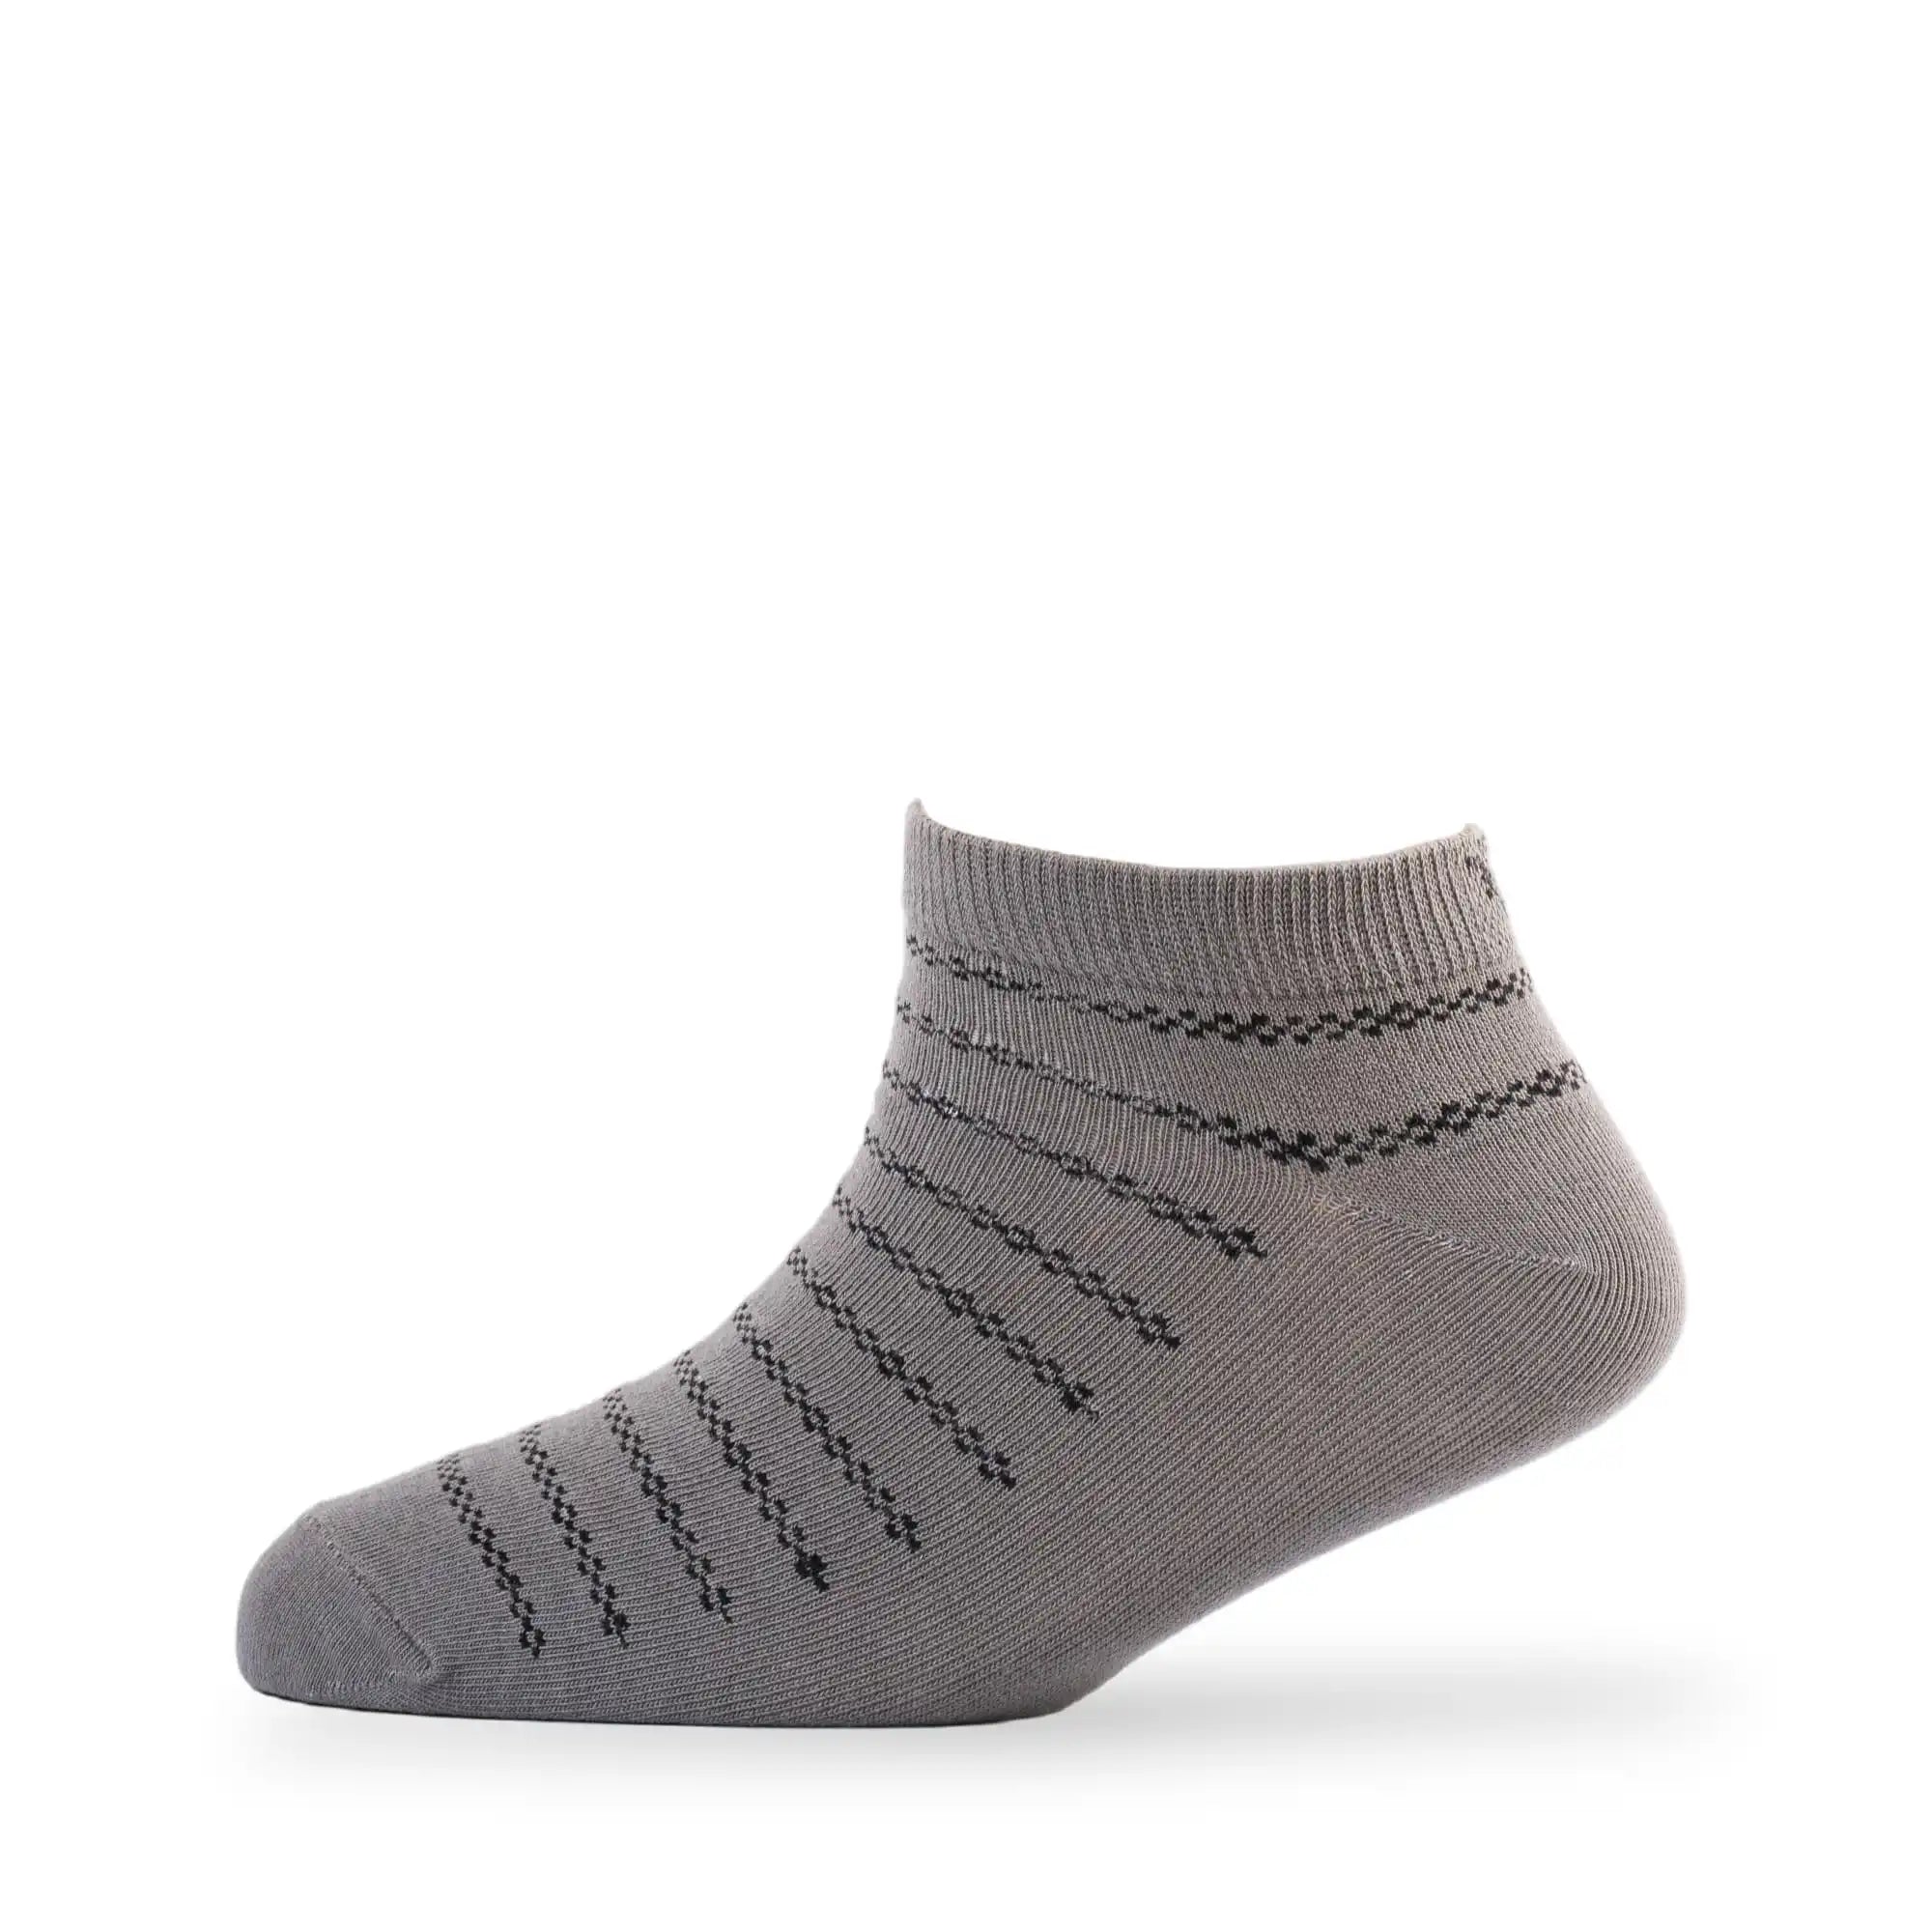 Young Wings Men's Multi Colour Cotton Fabric Design Low Ankle Length Socks - Pack of 5, Style no. 1714-M1